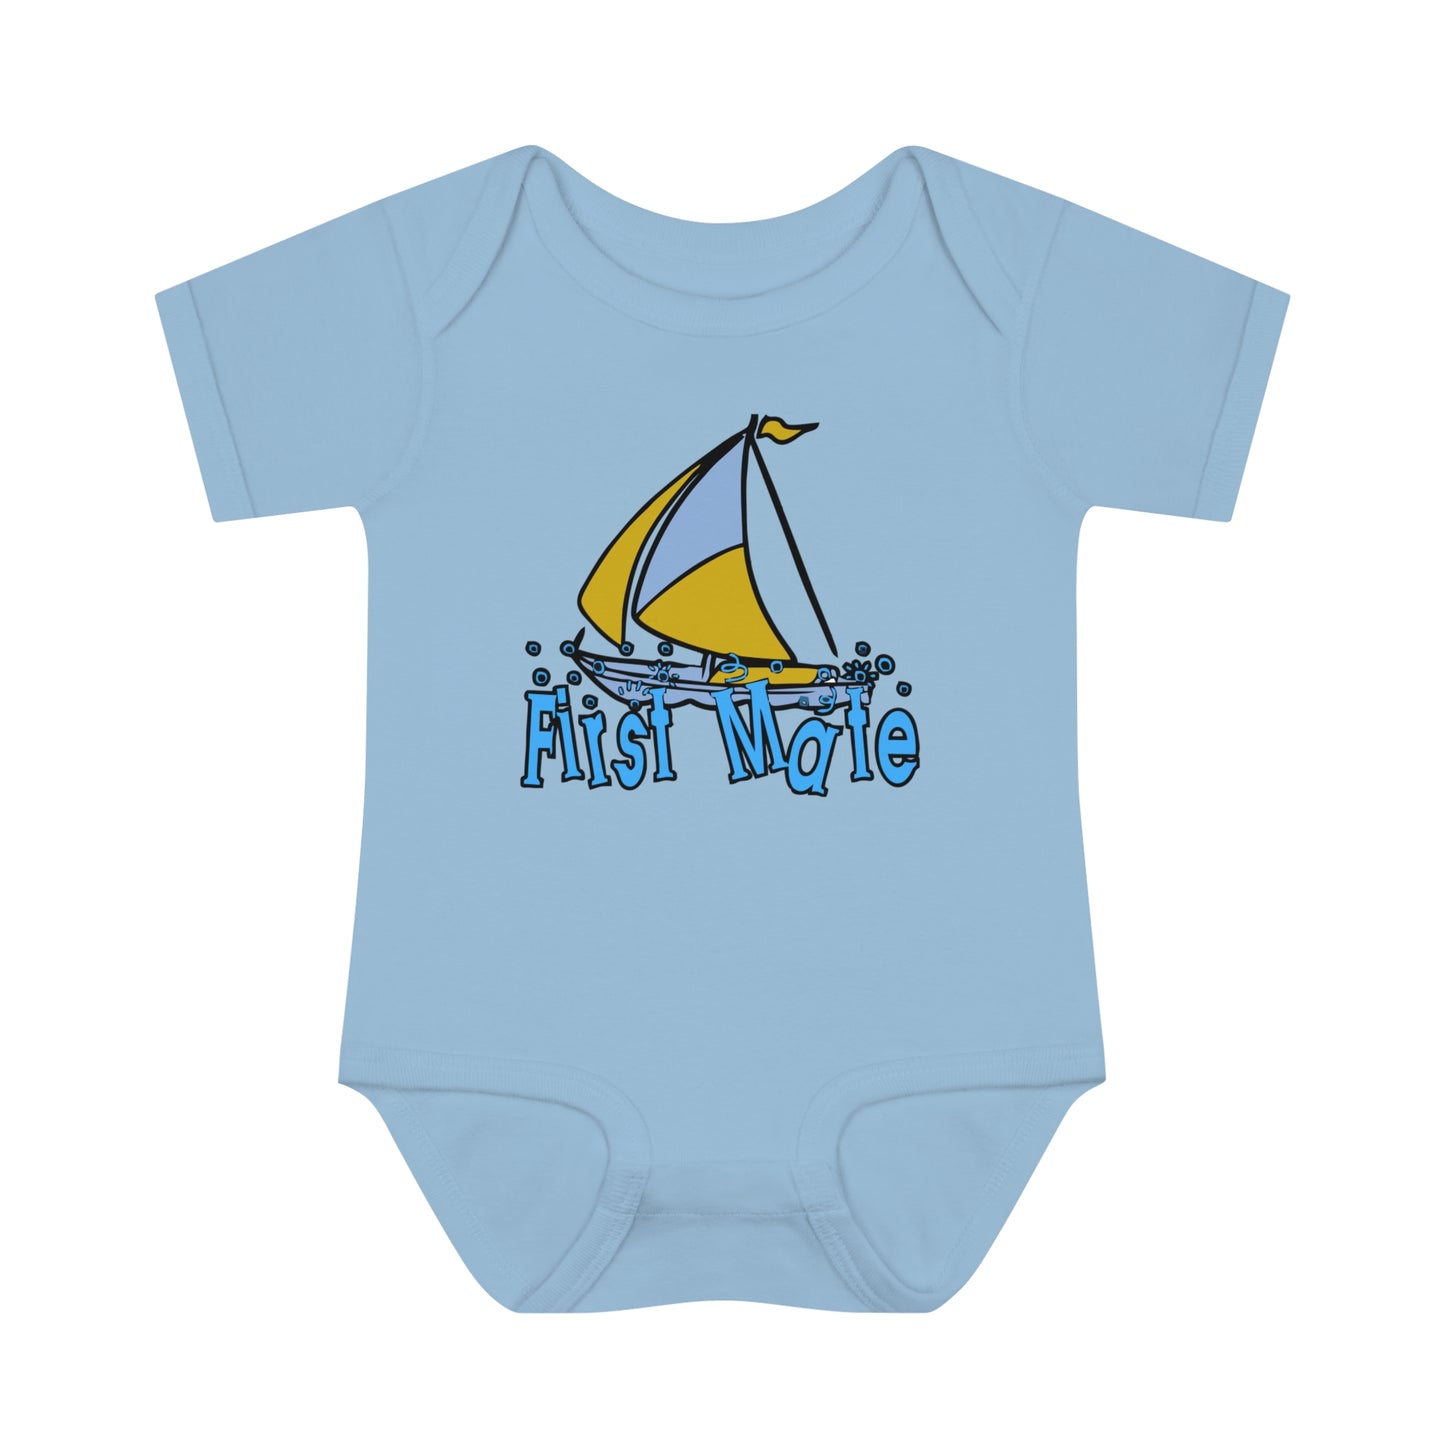 First Mate Infant T-shirt, Baby one-piece Sailor t-shirt, Sailboat Design, Baby Future, Sailor, Gift for Sailing Enthusiasts, Shower Gift